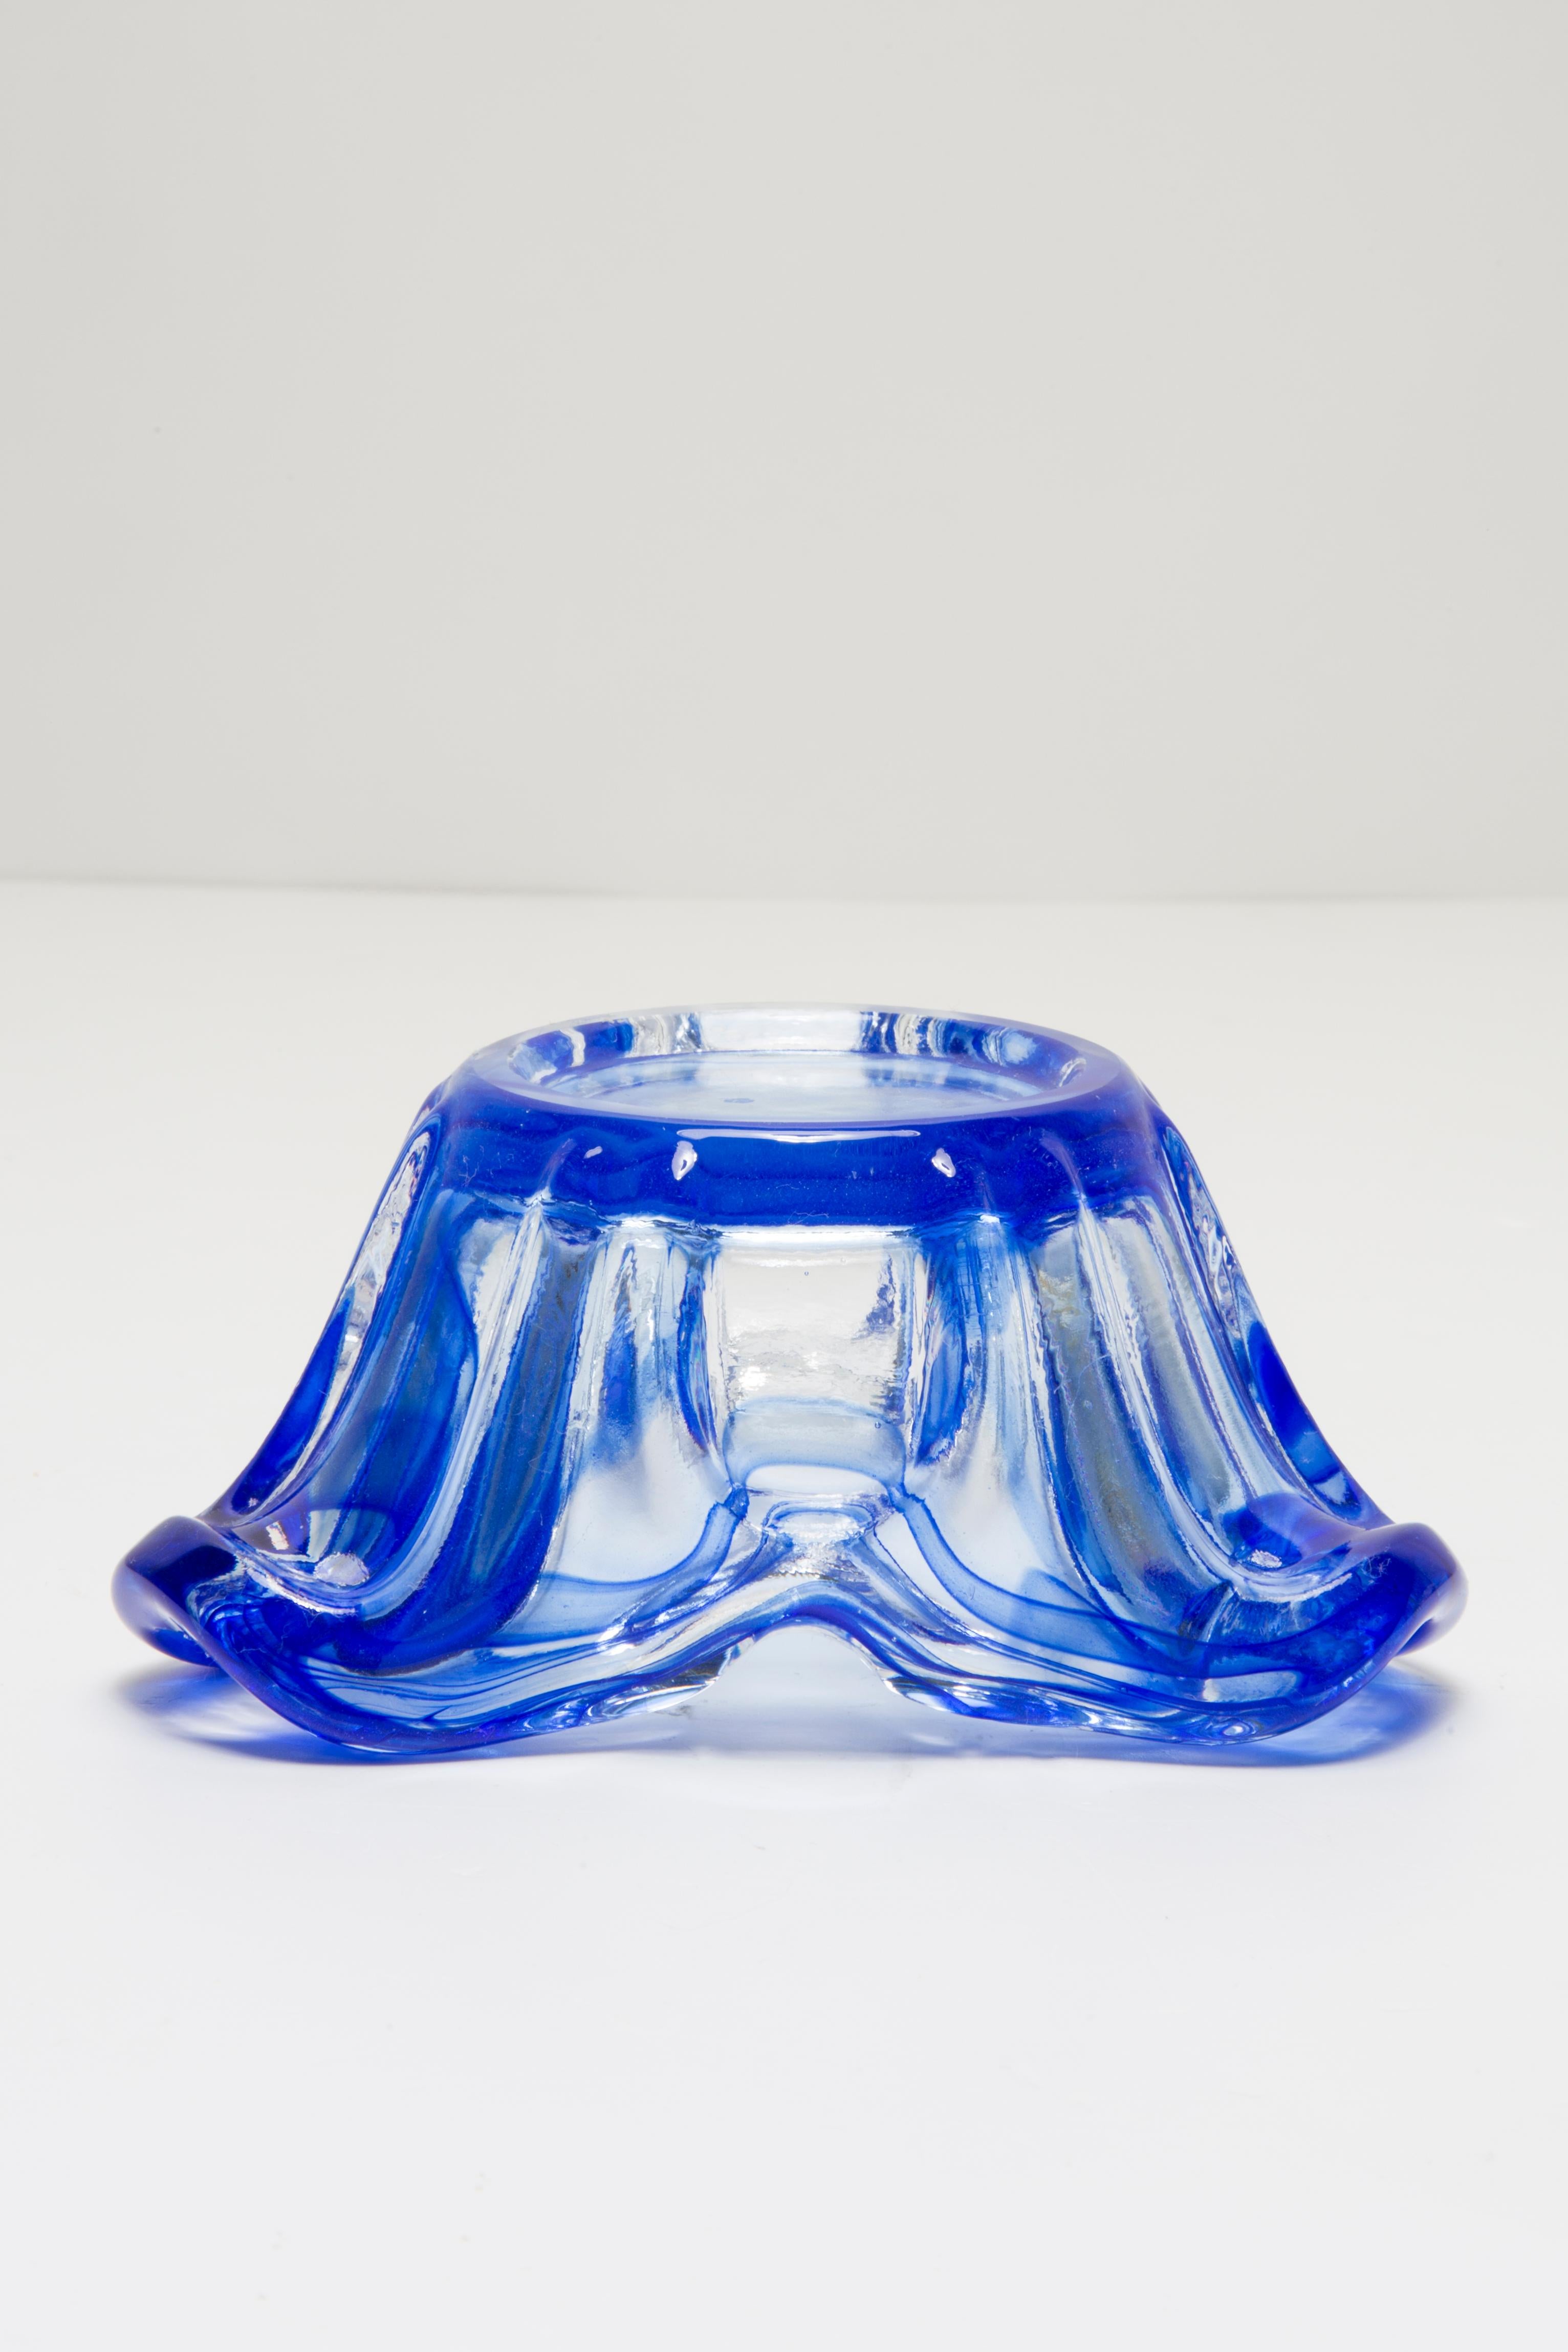 Mid Century Crystal Blue Artistic Glass Ashtray Bowl, Italy, 1970s For Sale 4